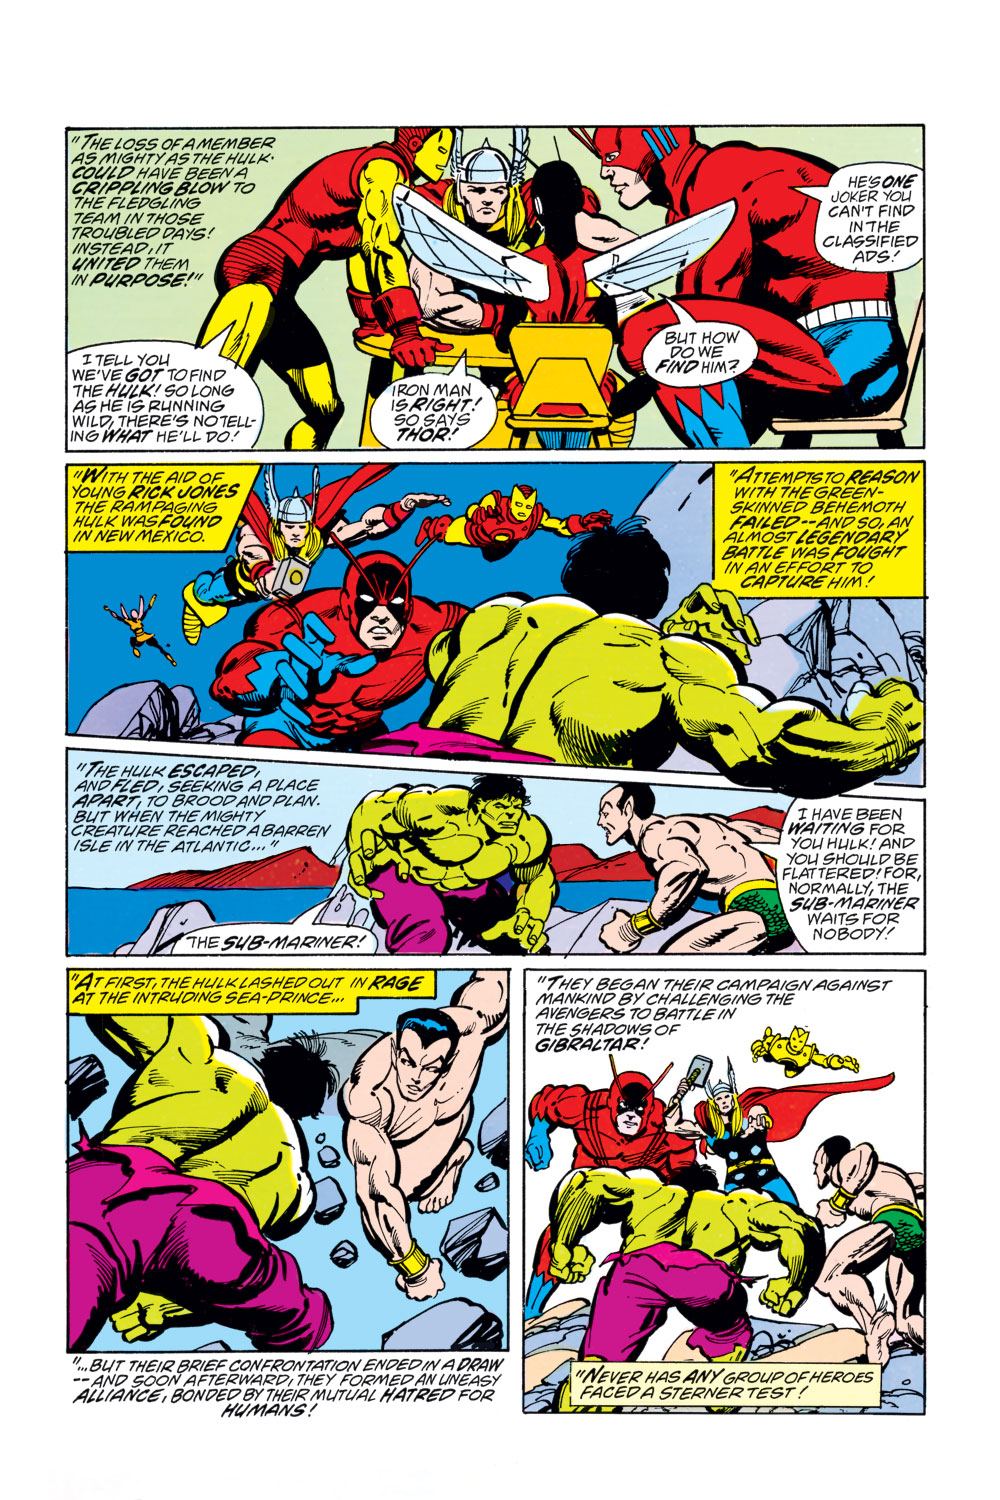 What If? (1977) issue 3 - The Avengers had never been - Page 3